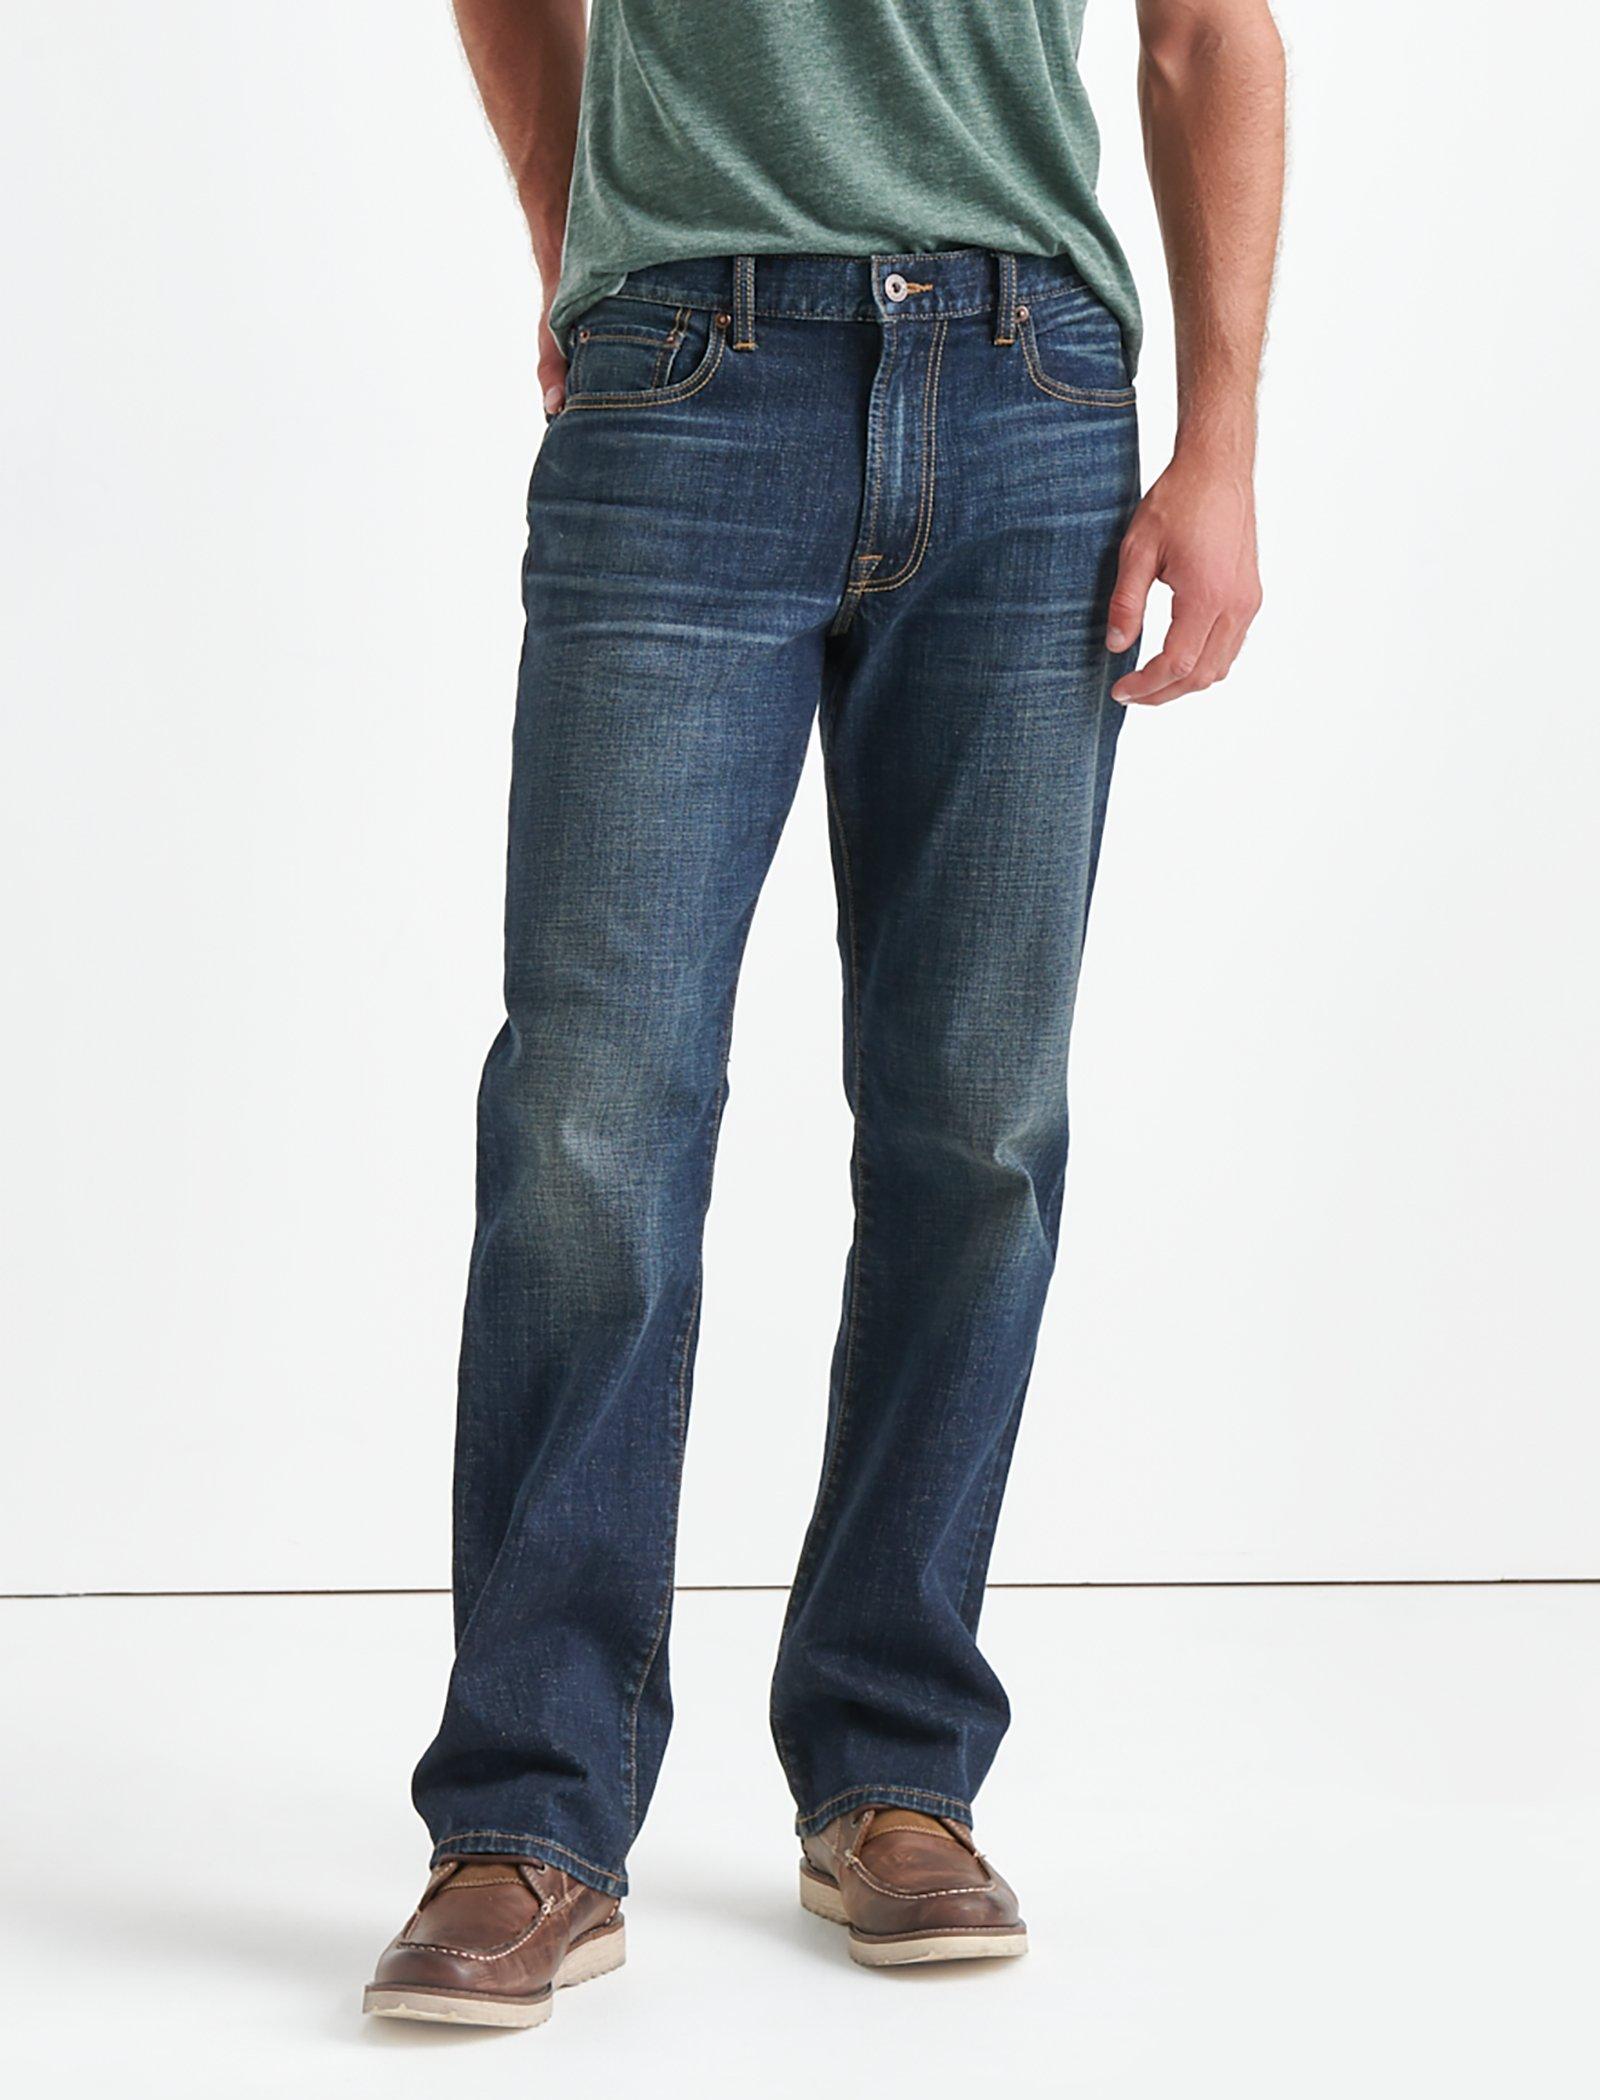 Lucky Brand 181 Relaxed Straight Leg Jeans